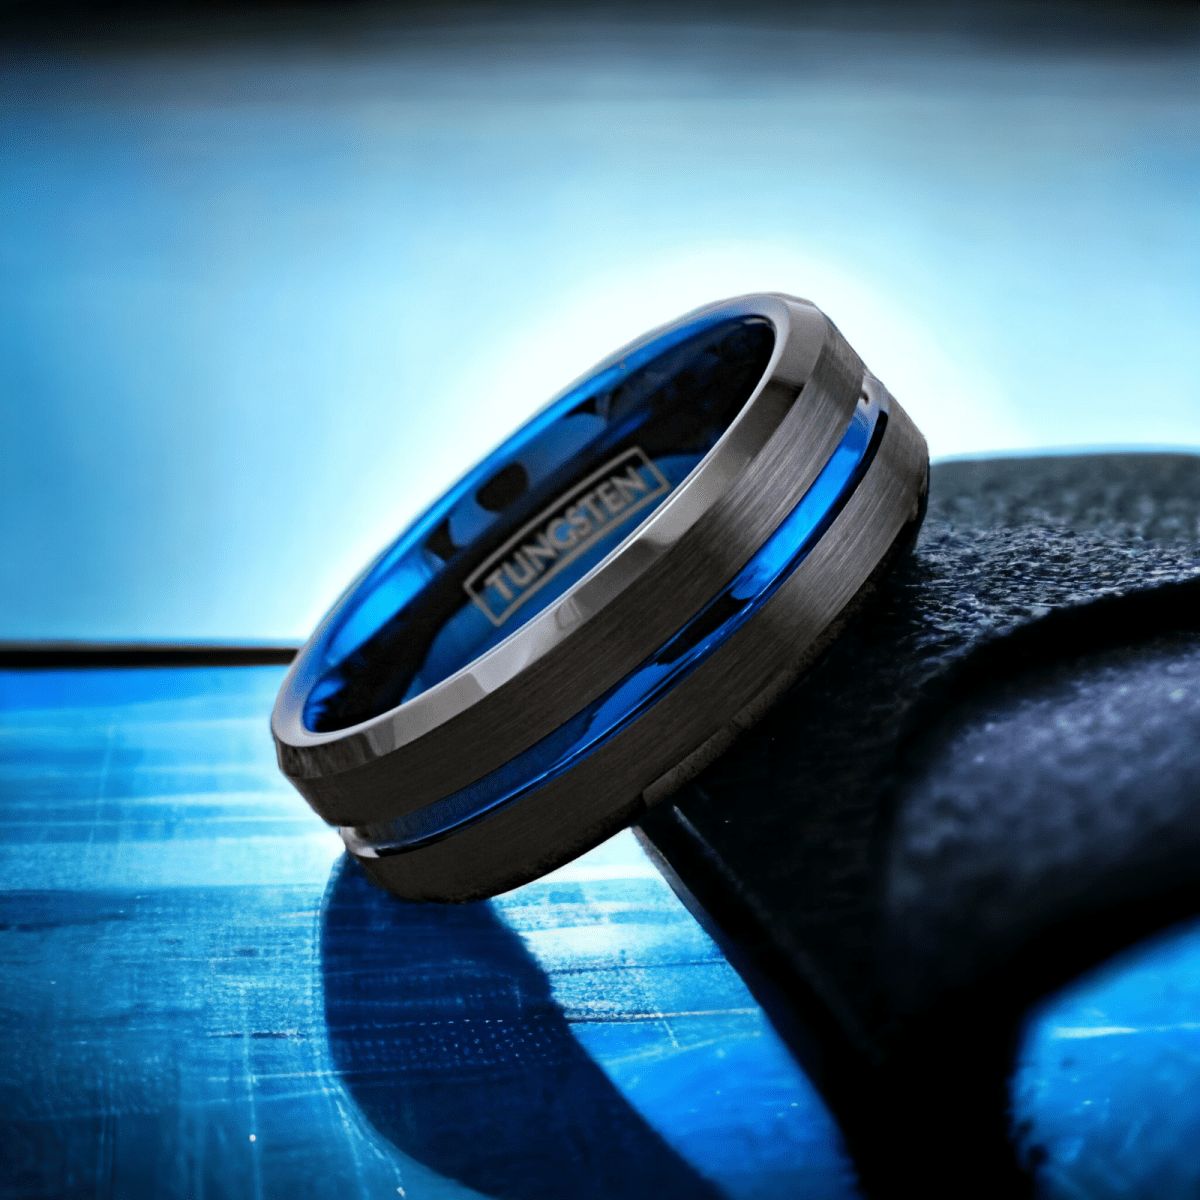 blue and black tungsten wedding ring with beveled edges and a blue inner sleeve.